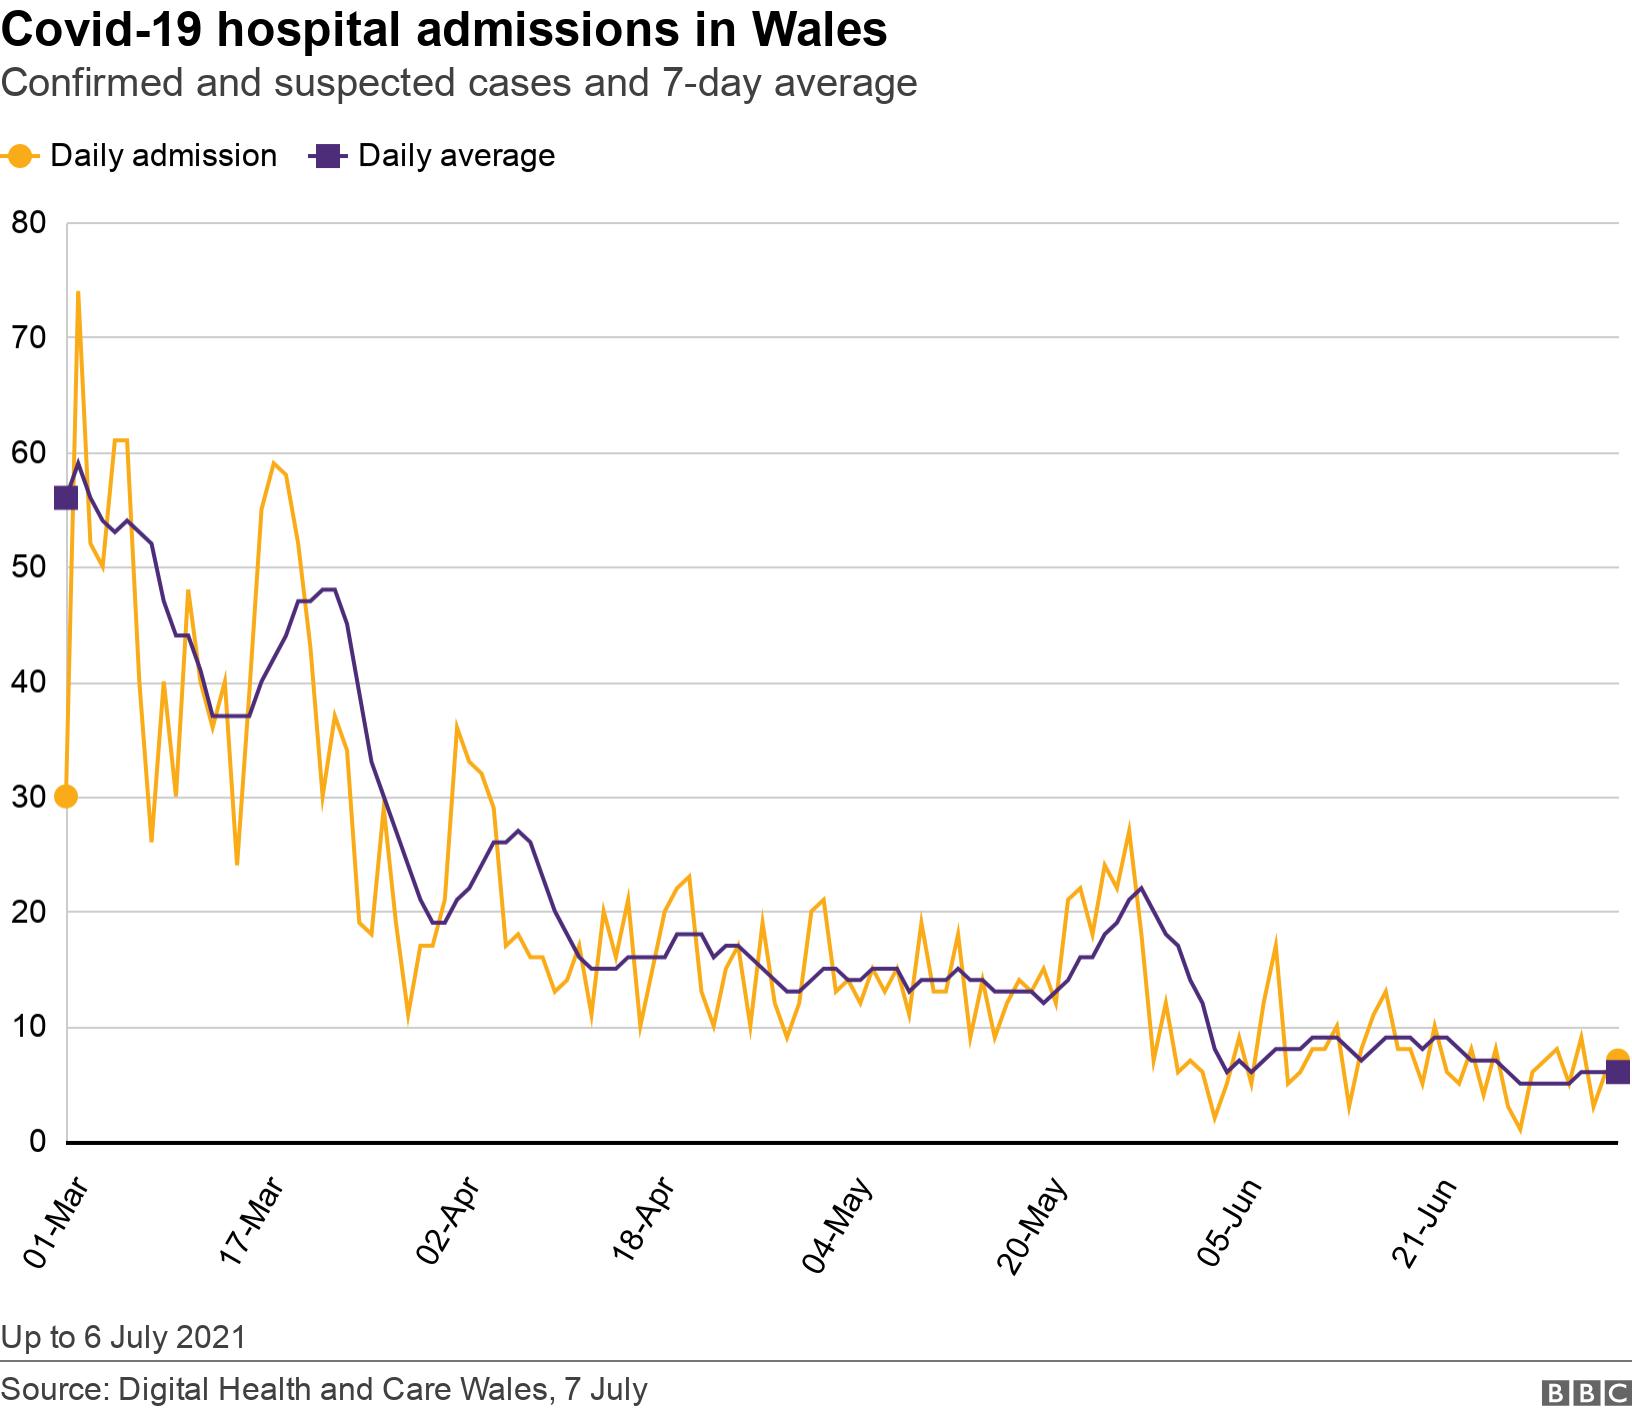 Covid-19 hospital admissions in Wales. Confirmed and suspected cases and 7-day average.  Up to 6 July 2021.